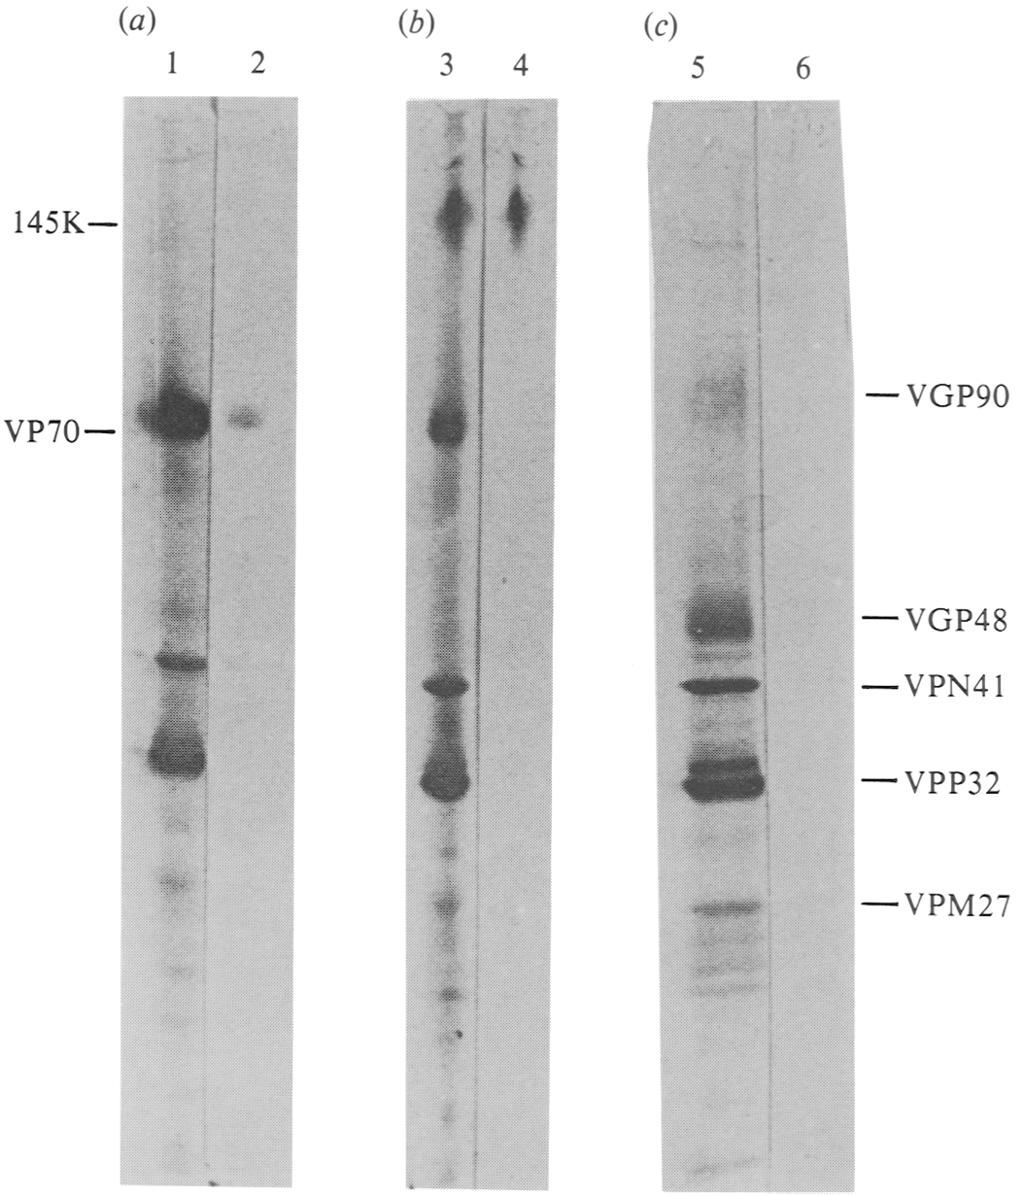 866 H. B. GIMENEZ AND OTHERS (a) (b) (c) 1 2 3 4 5 145K-- VP70~ -- VGP90 --VGP48 VPN41 ~VPP32 --VPM27 Fig. 2. Reaction of the 4-15 antibody with the proteins of RS virus.